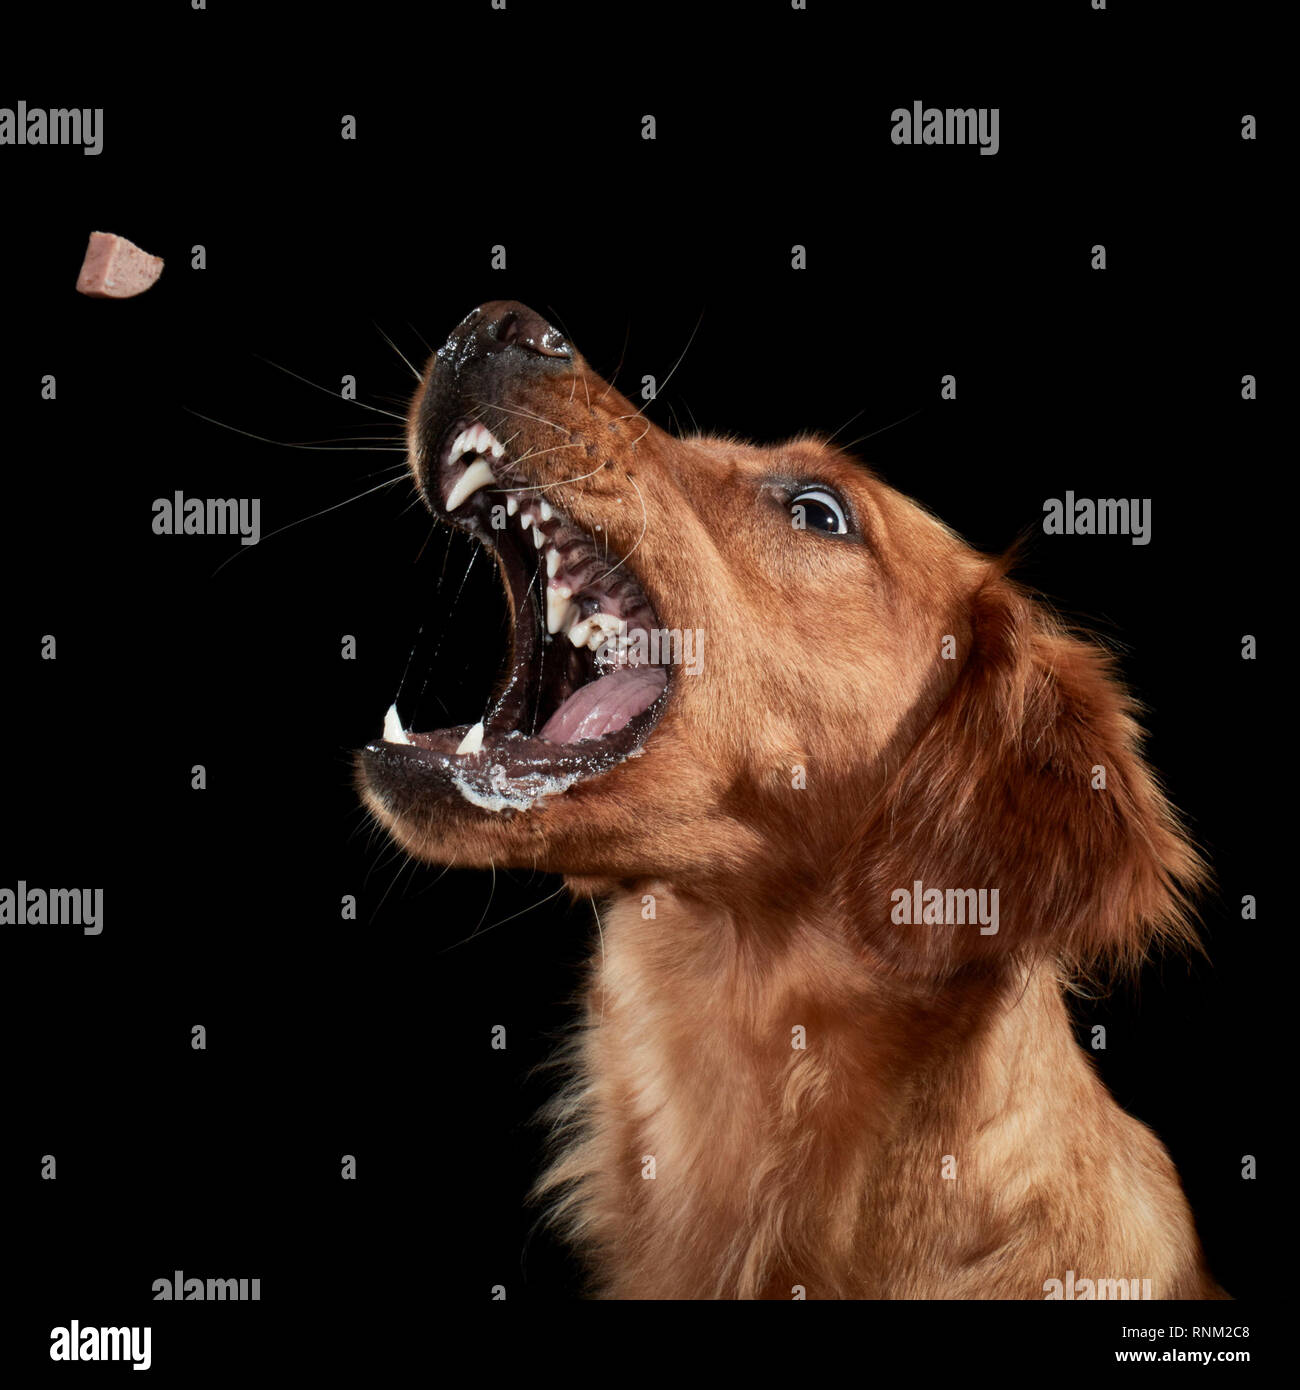 Golden Retriever. Adult catching a treat. Studio picture against a black background. Germany Stock Photo